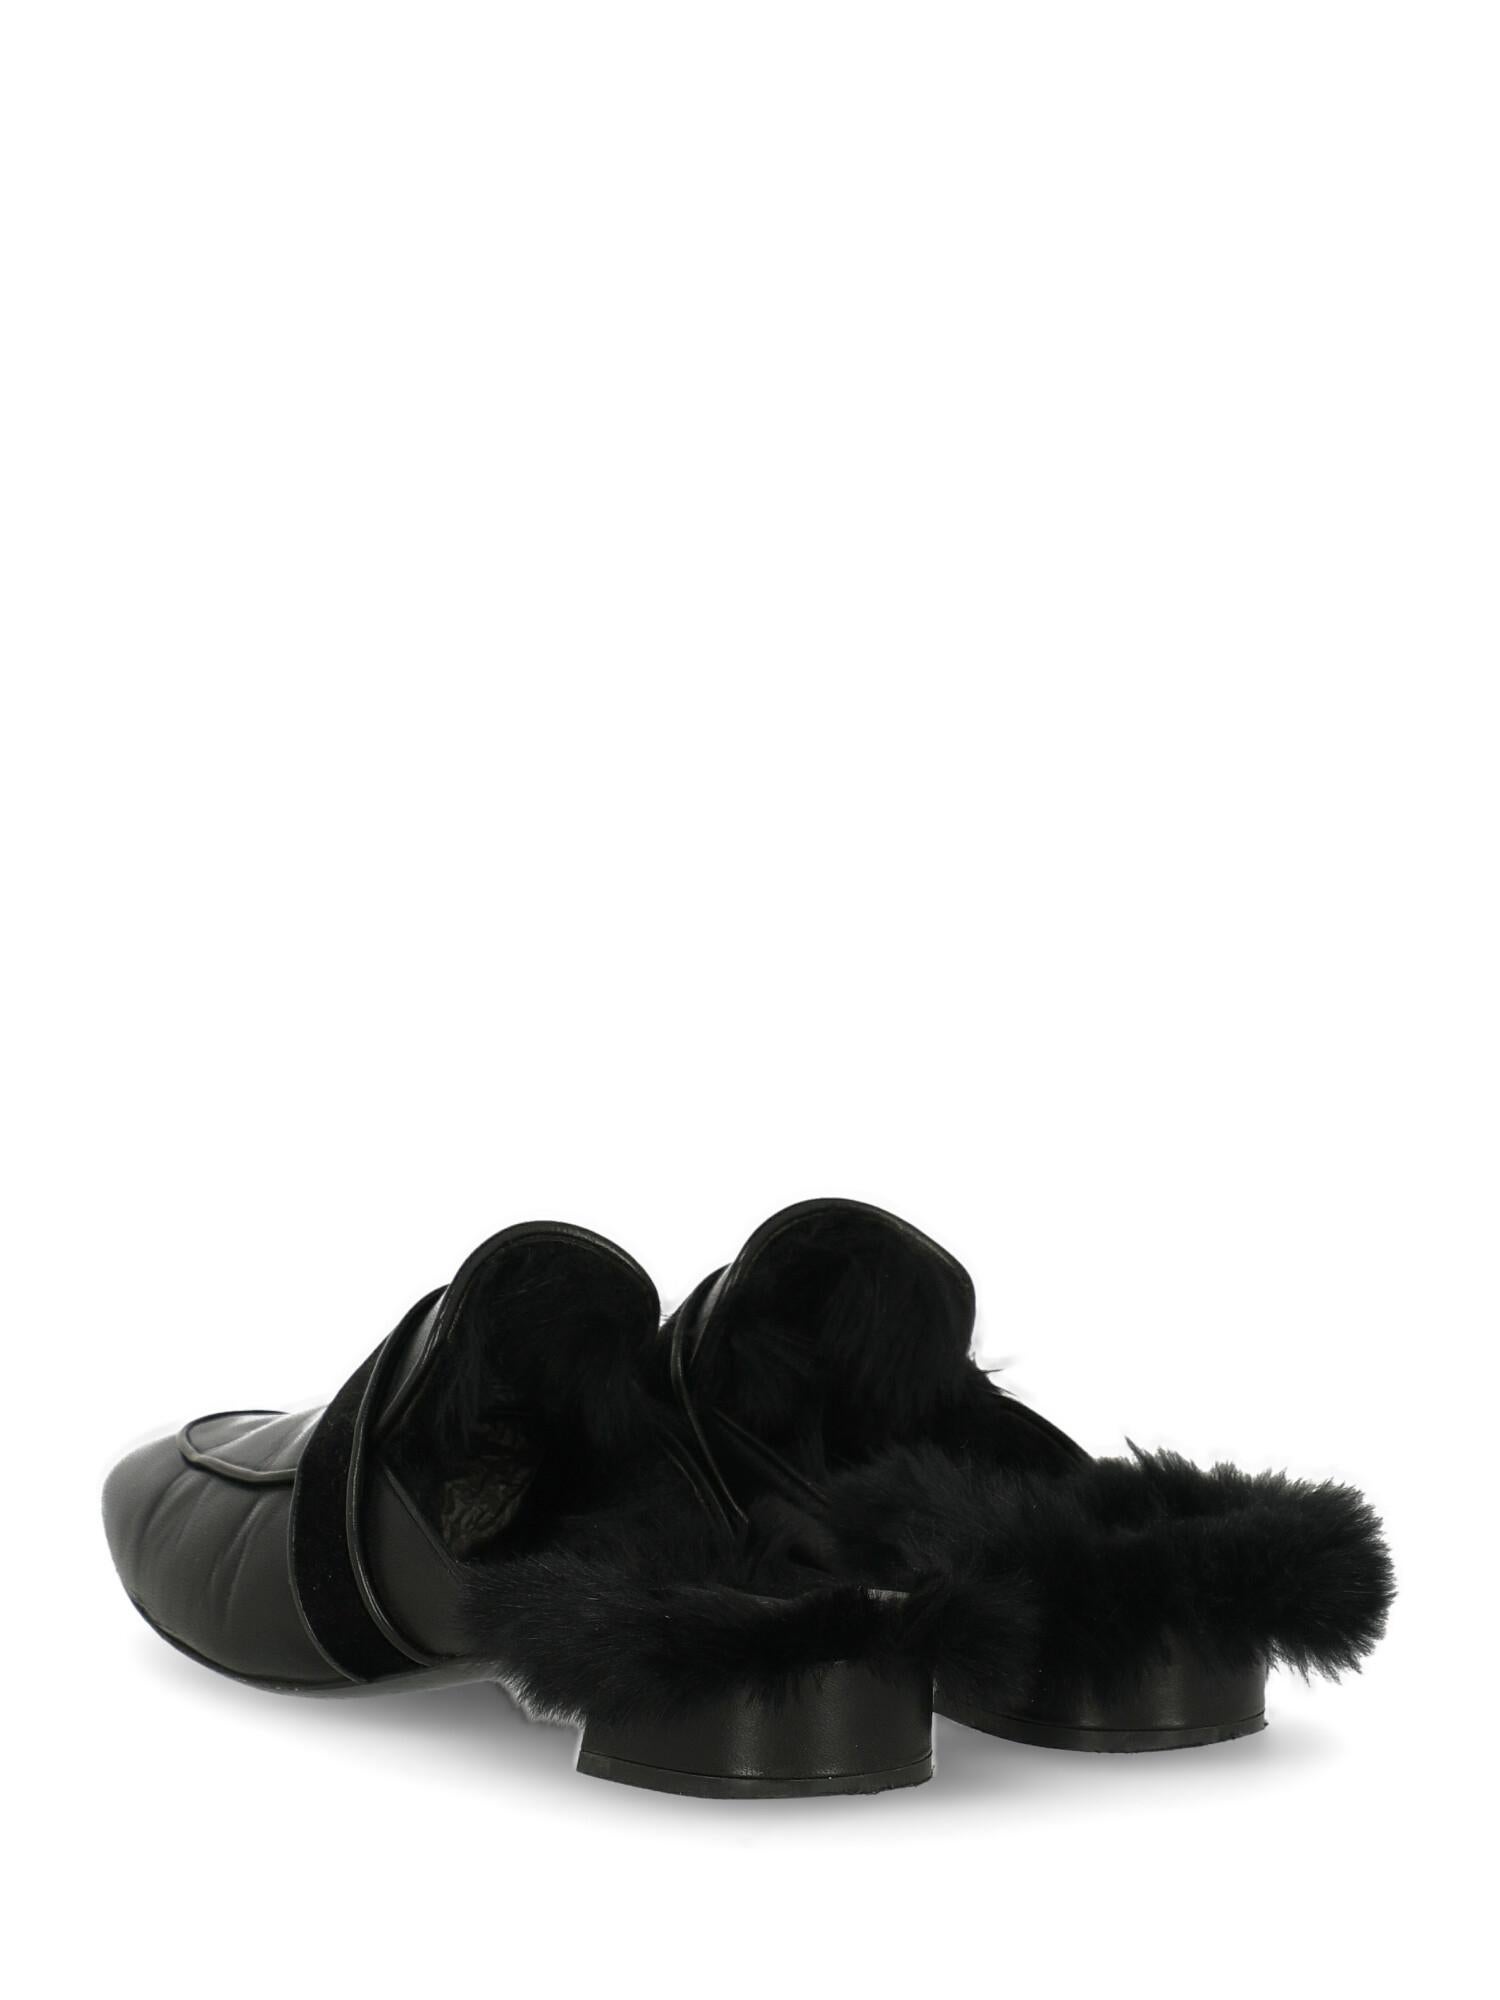 Women's Casadei Woman Slippers Black Leather IT 37.5 For Sale